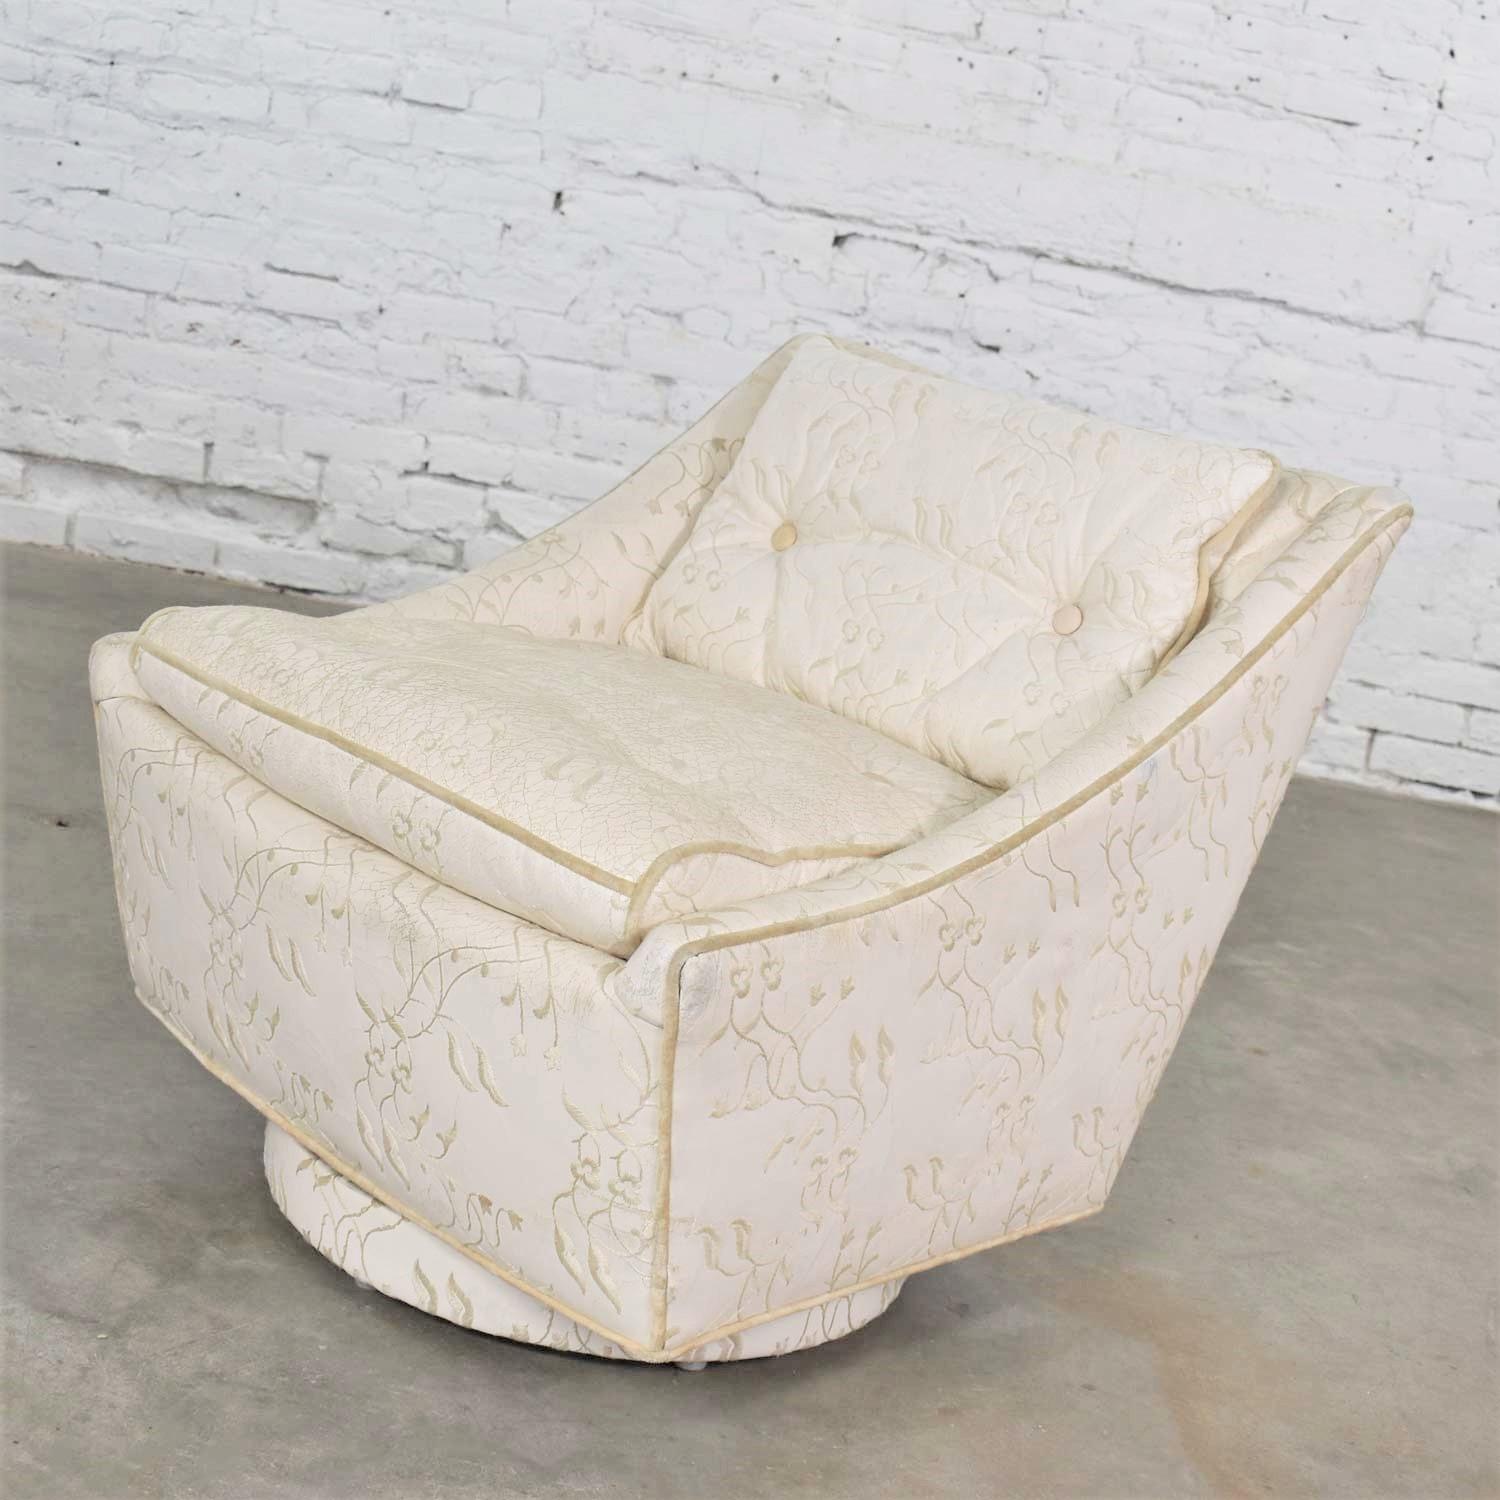 20th Century Vintage Art Deco Petite White Swivel Chair Embroidered Leather by Oxford Ltd. For Sale